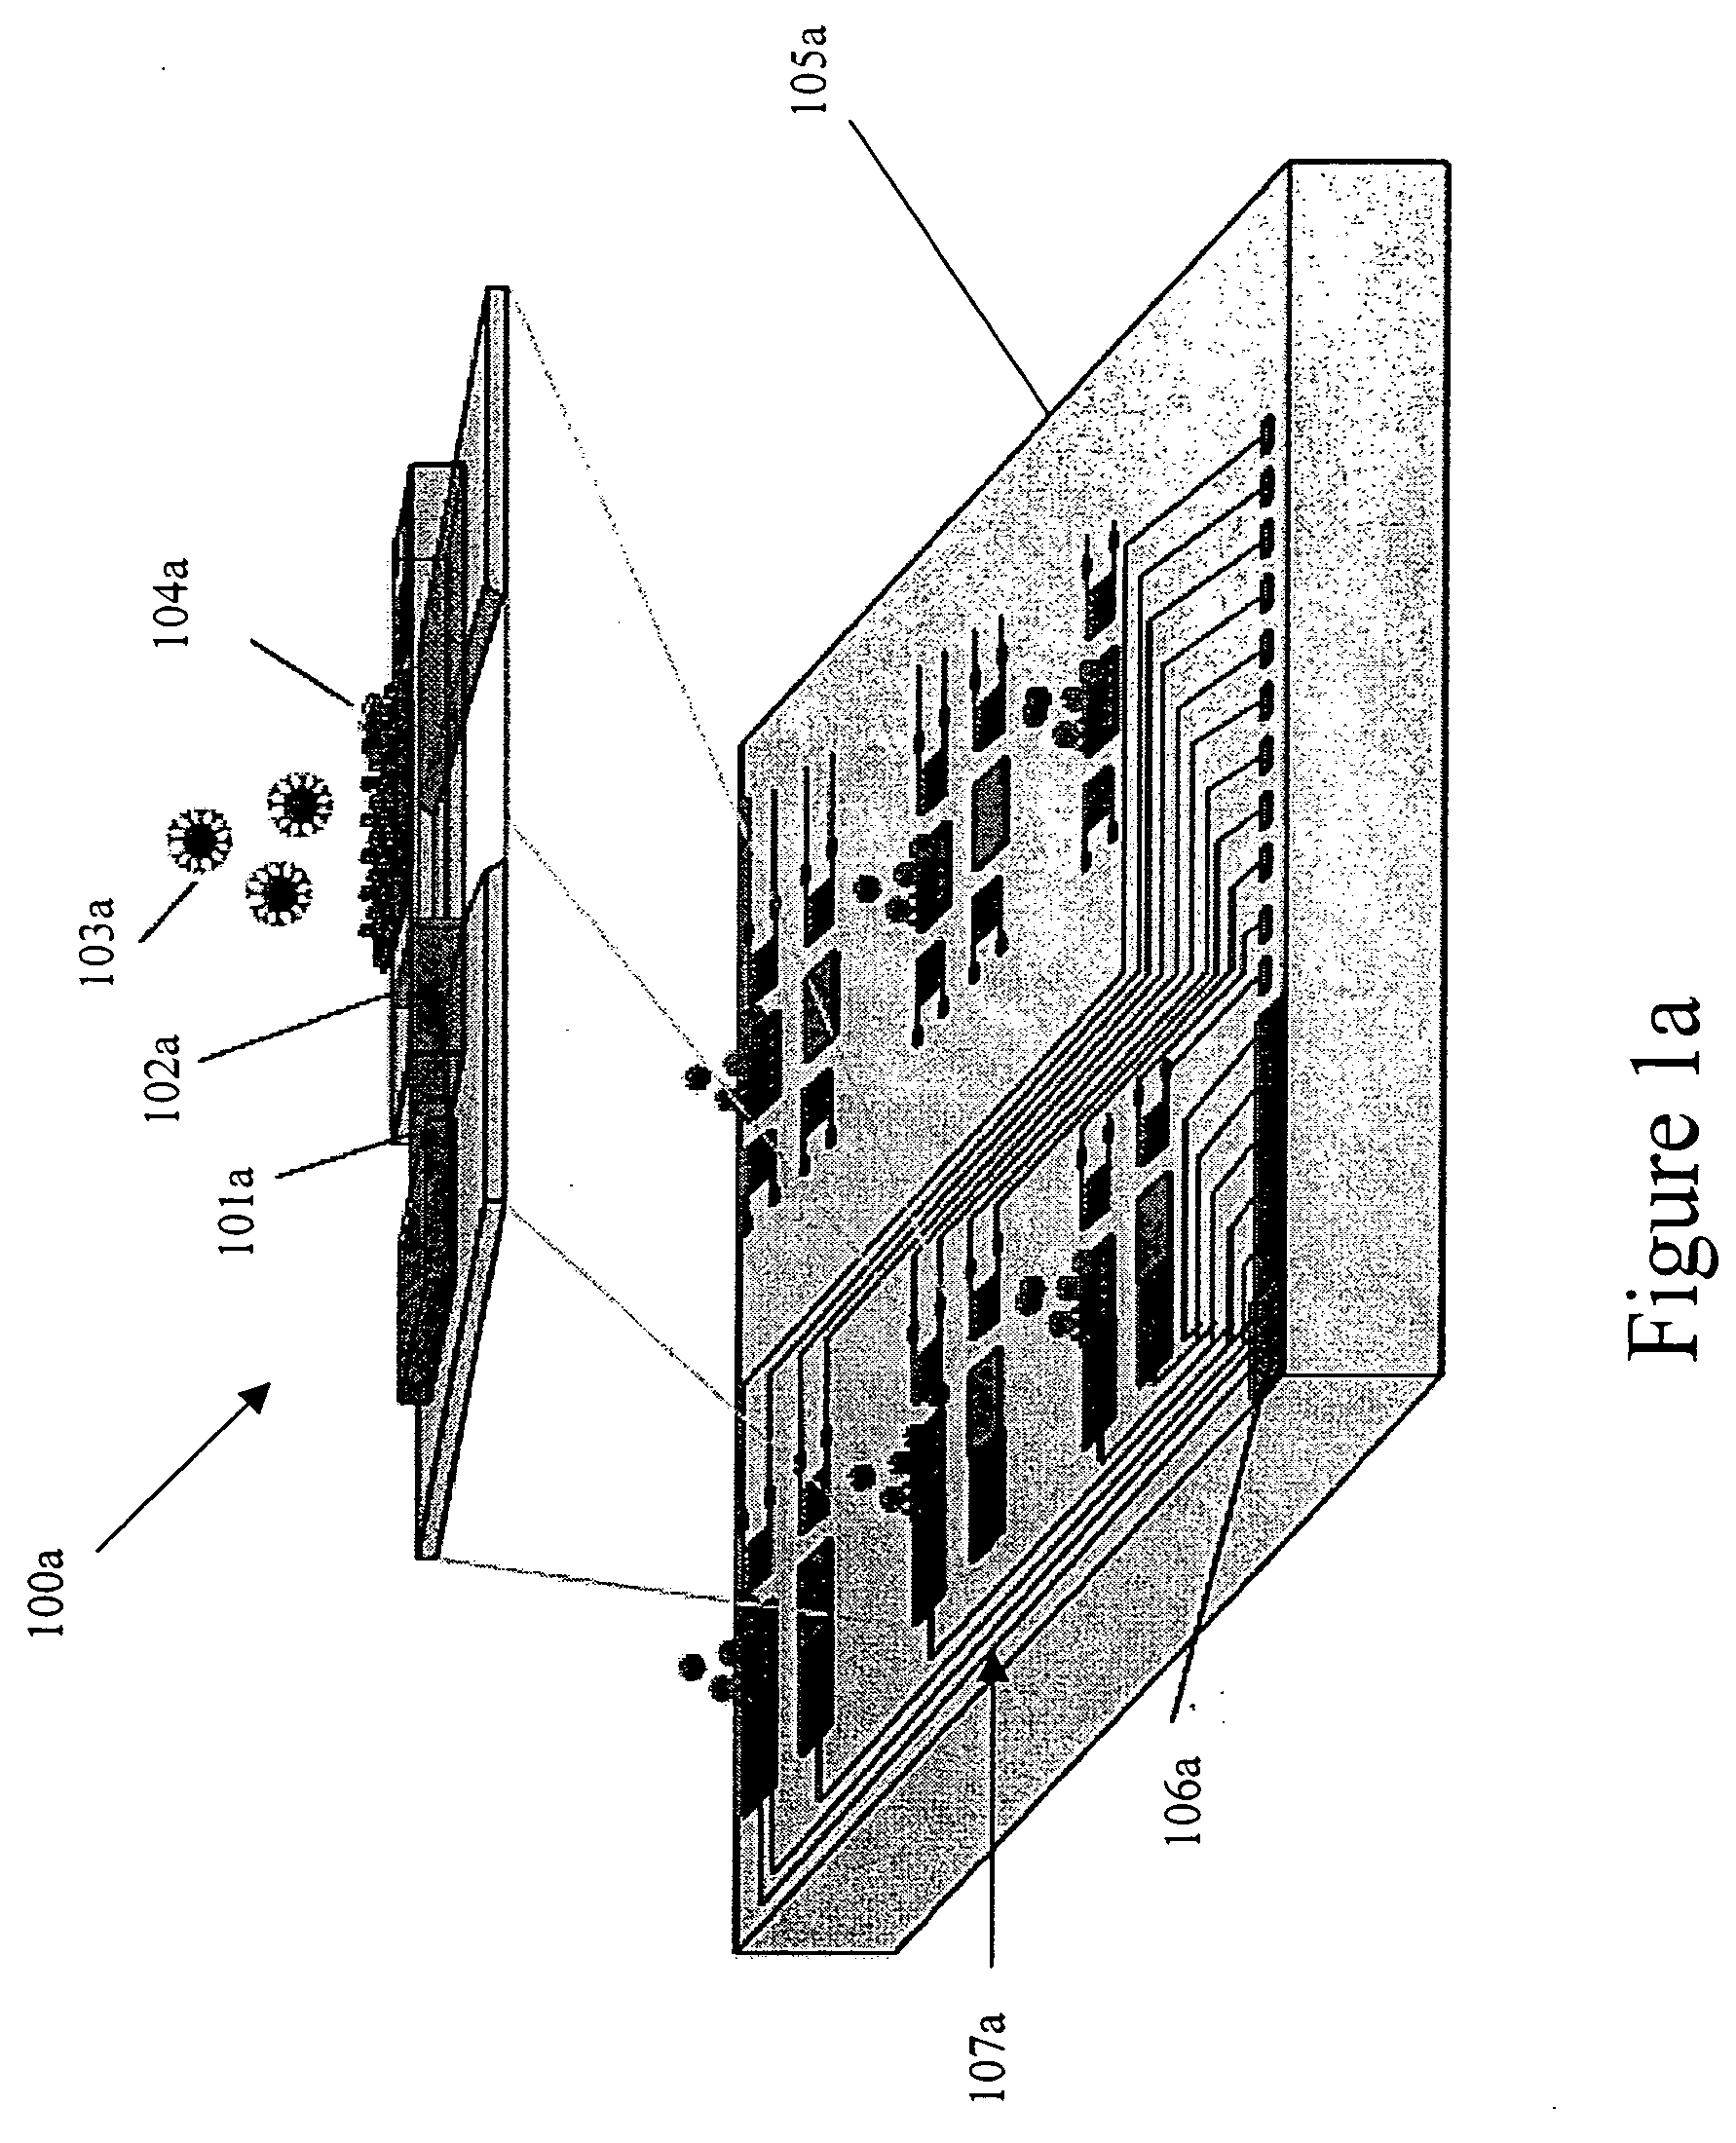 Acoustic wave sensor apparatus, method and system using wide bandgap materials